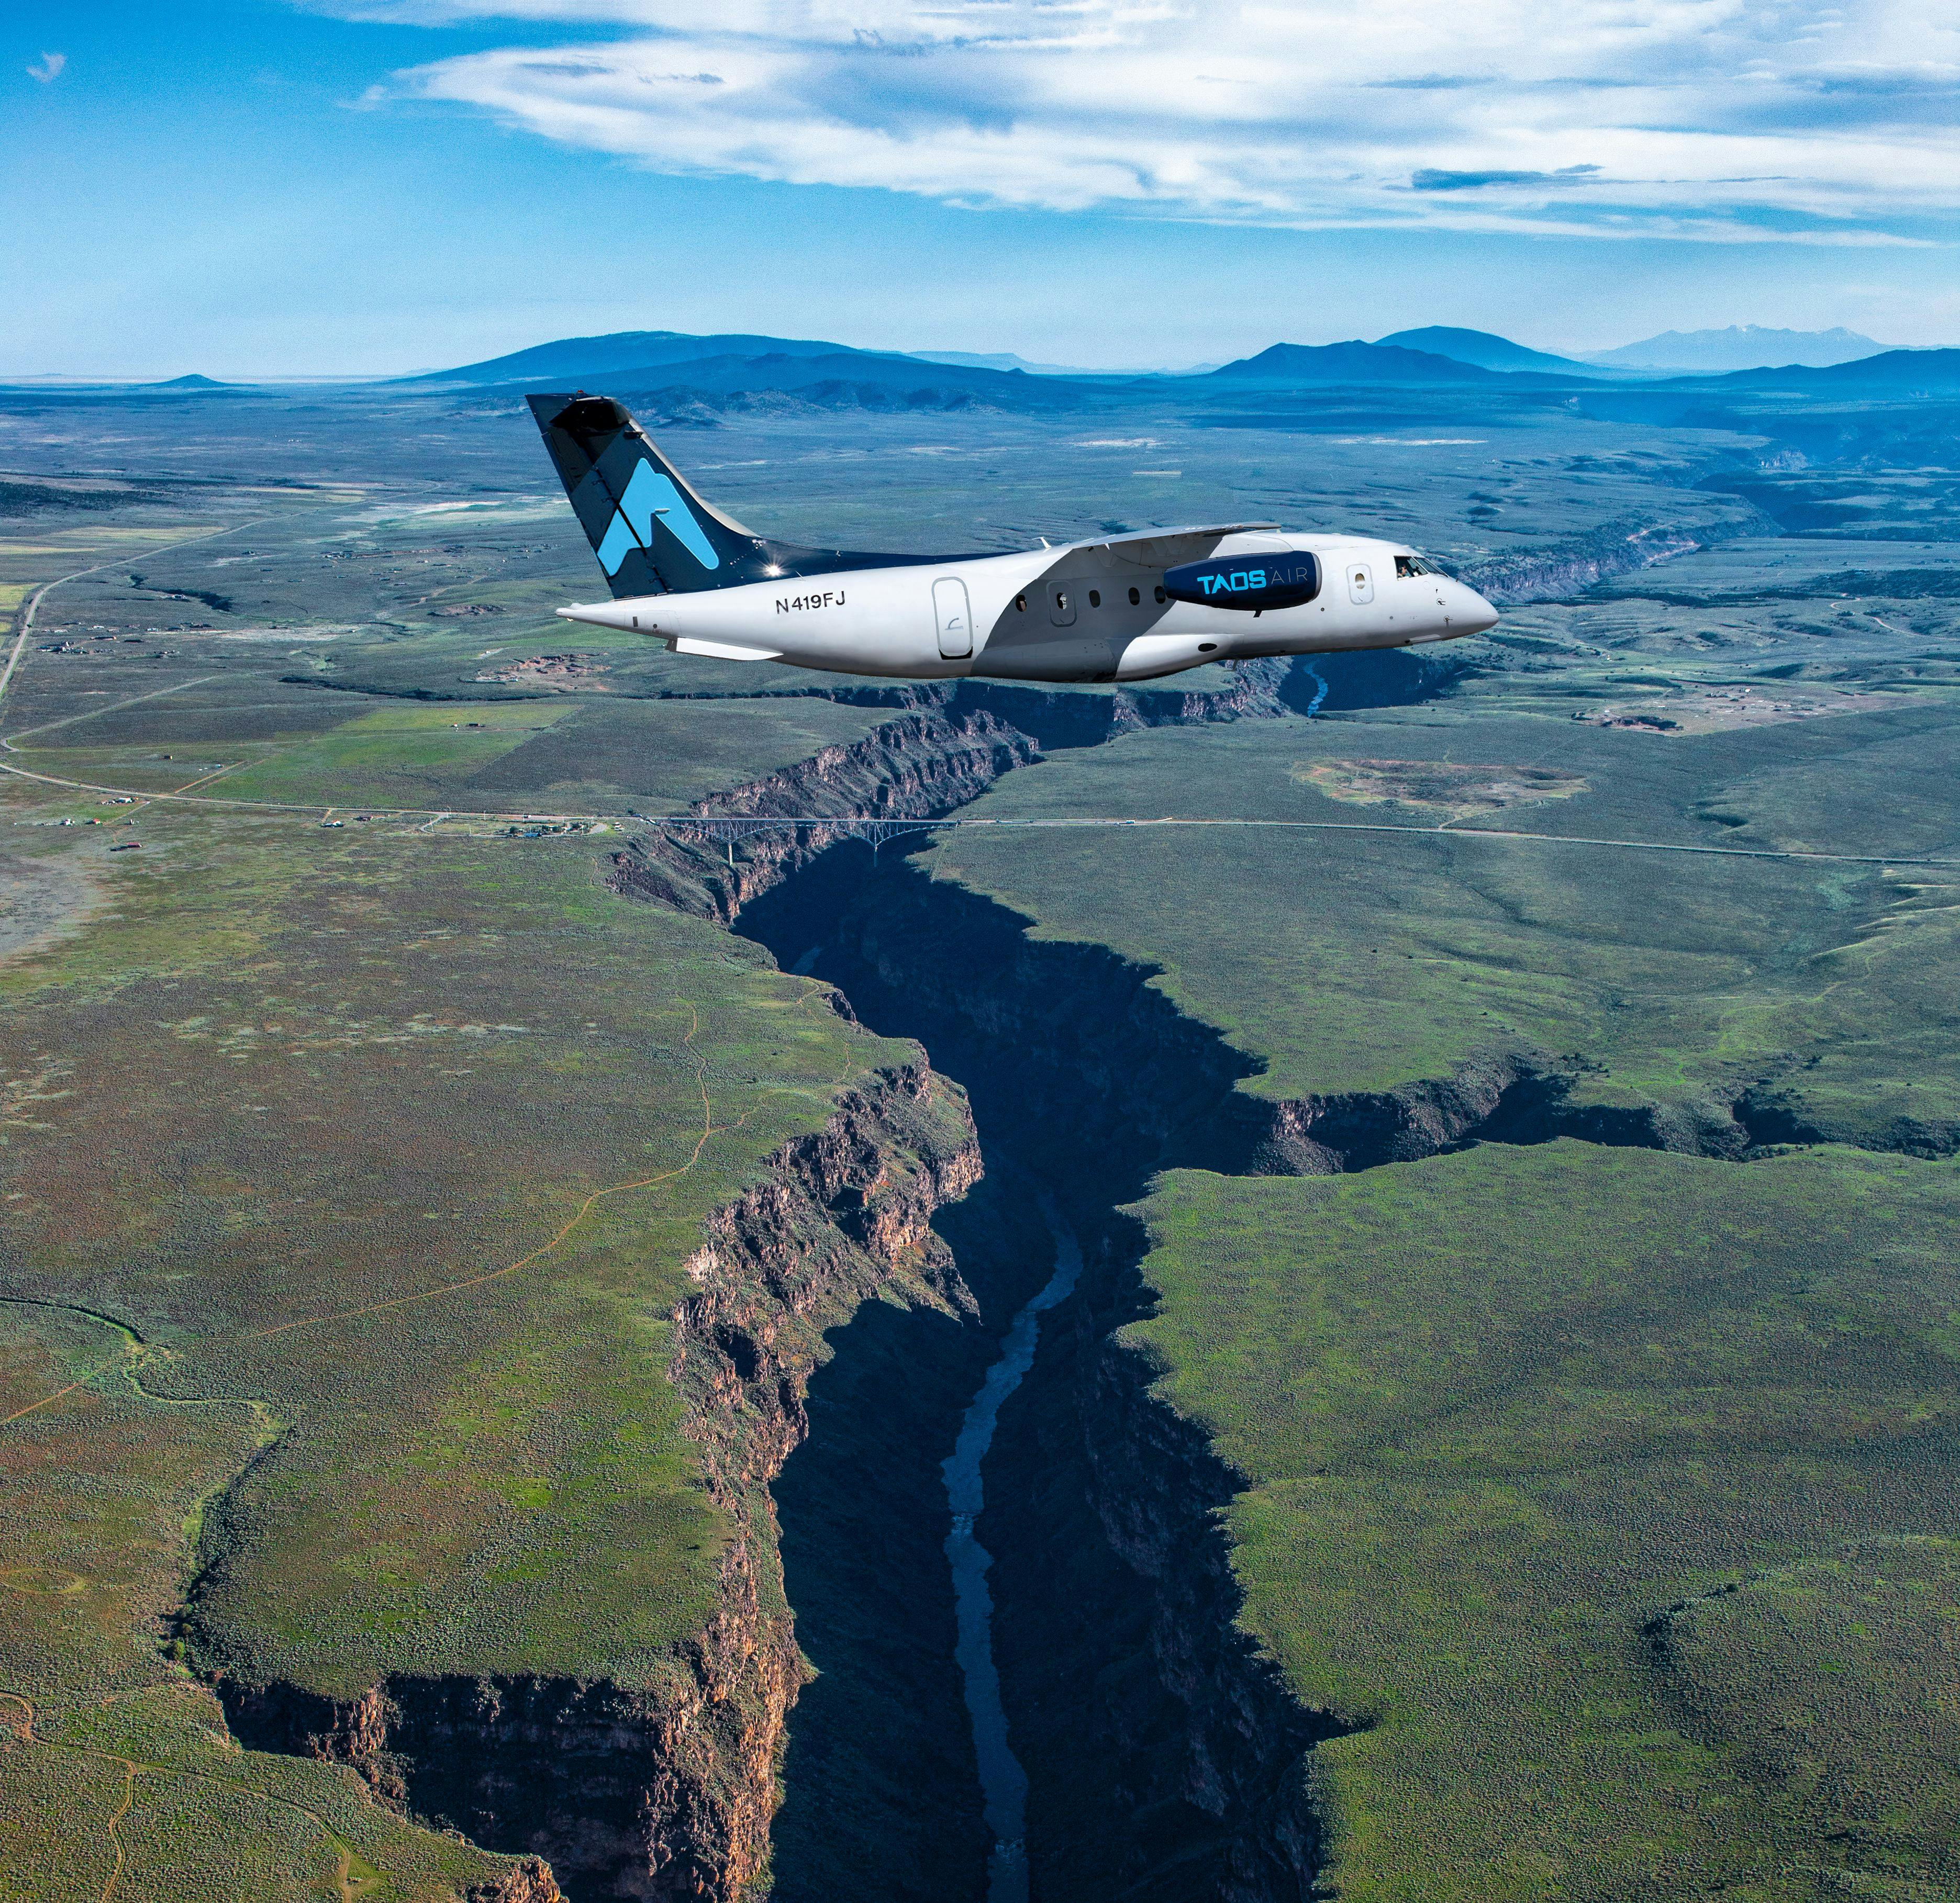 Taos Air JSX plane flying over rio grande gorge